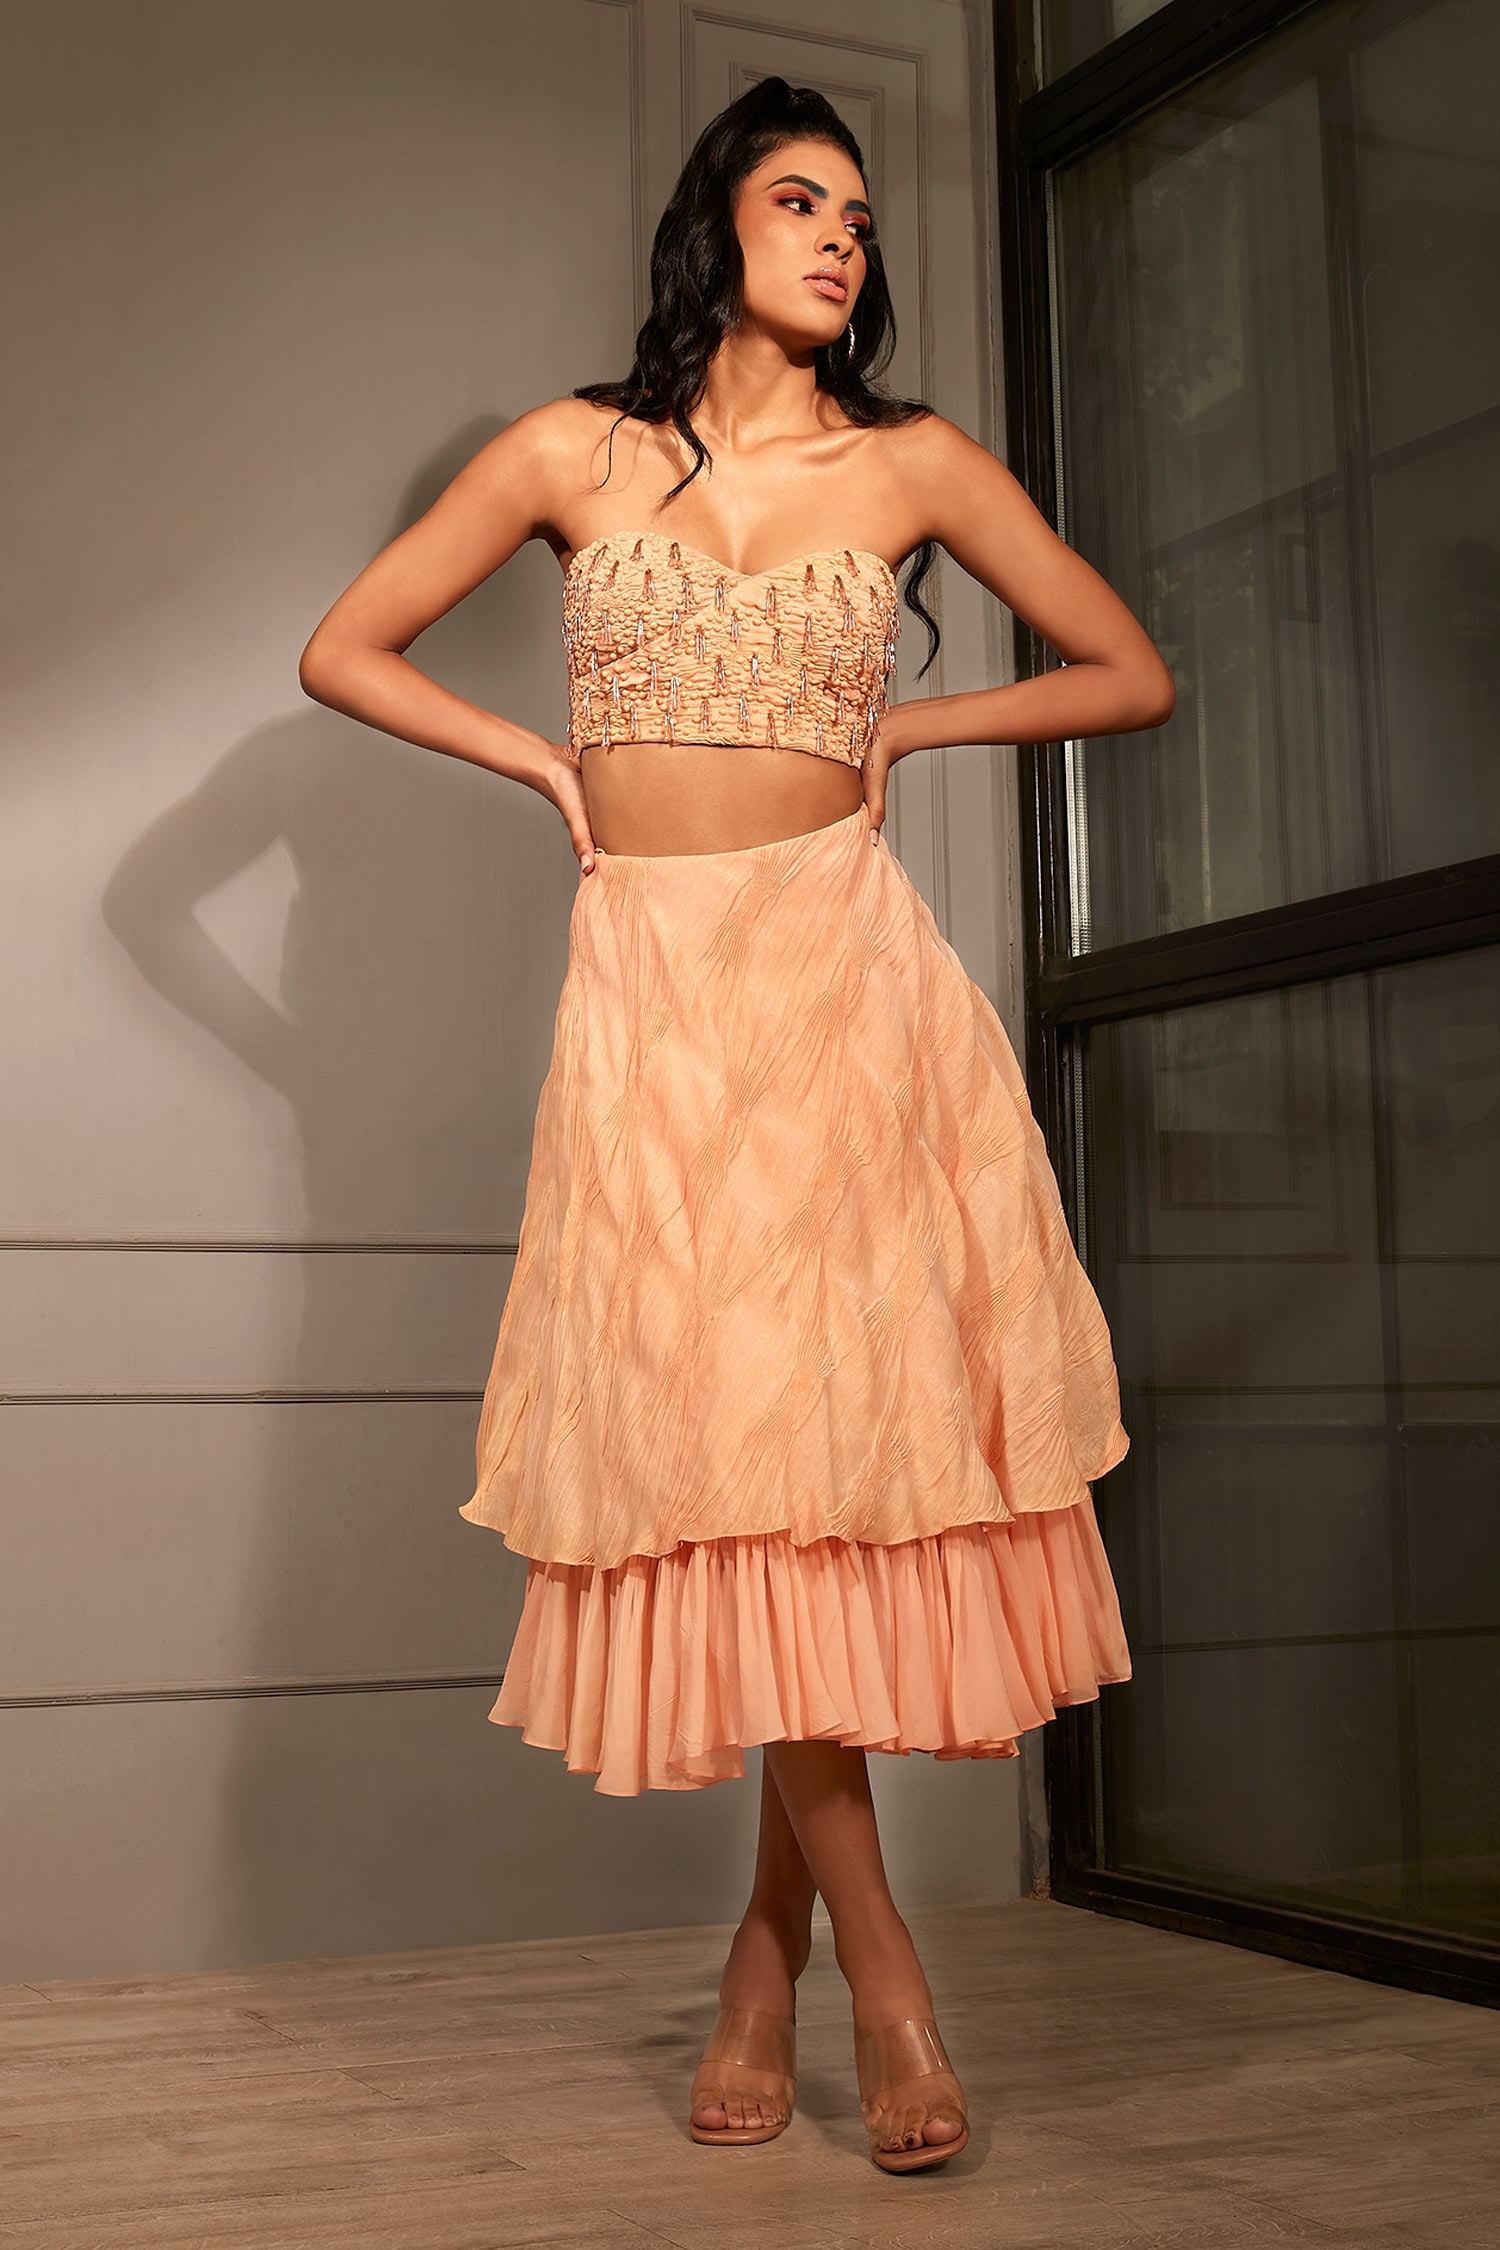 BABITA MALKANI STUDIO presents Bralette, Jacket And Dhoti Skirt exclusively  available only at FEI